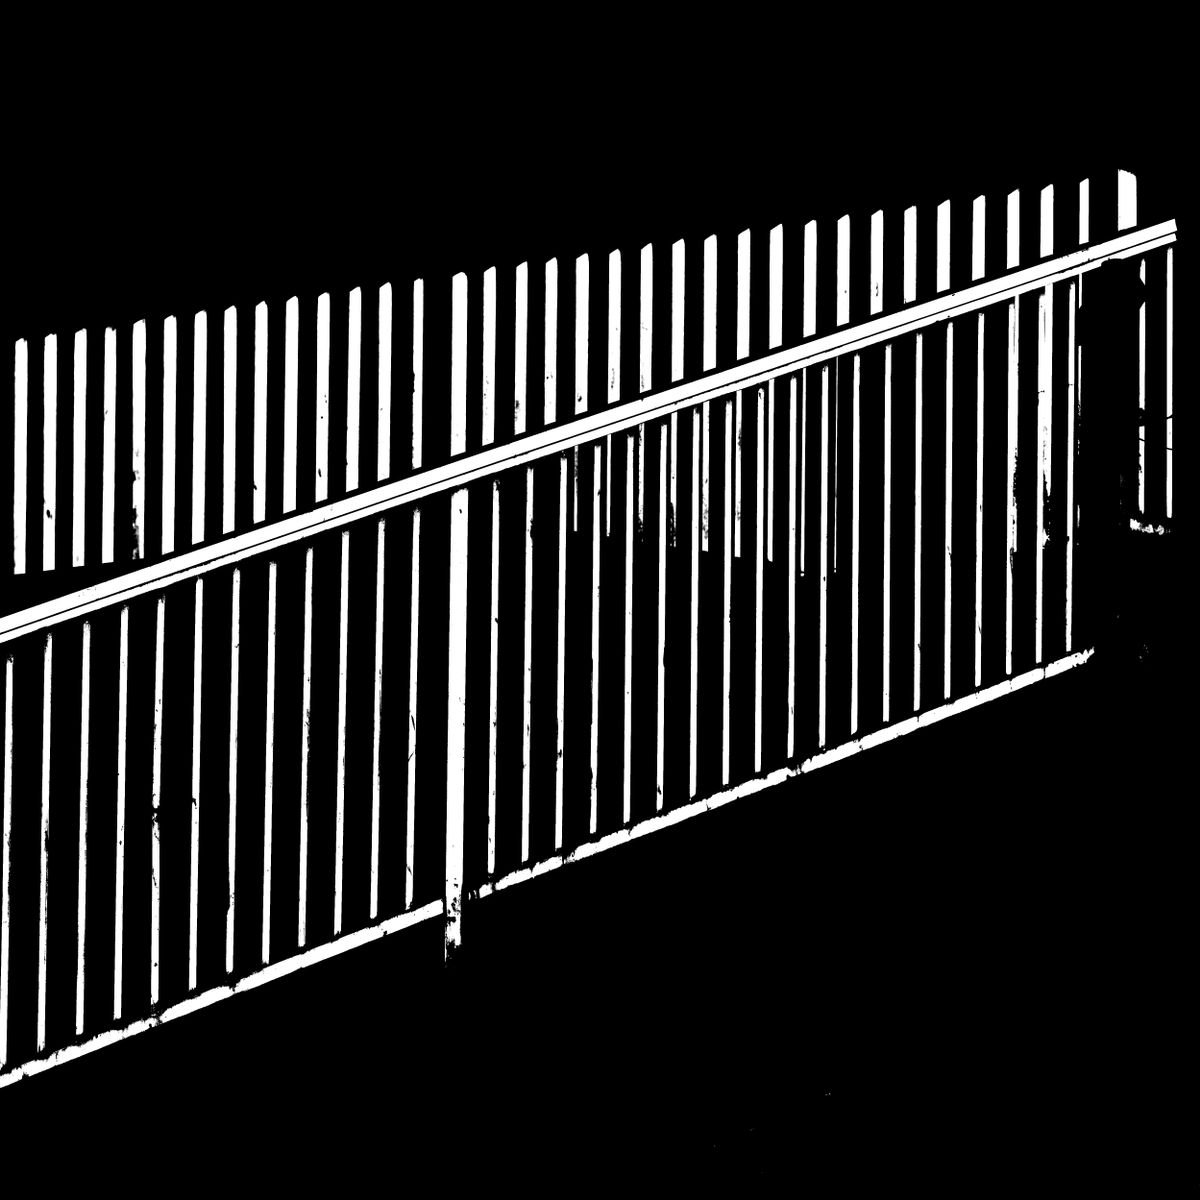 The Fence by Dieter Mach